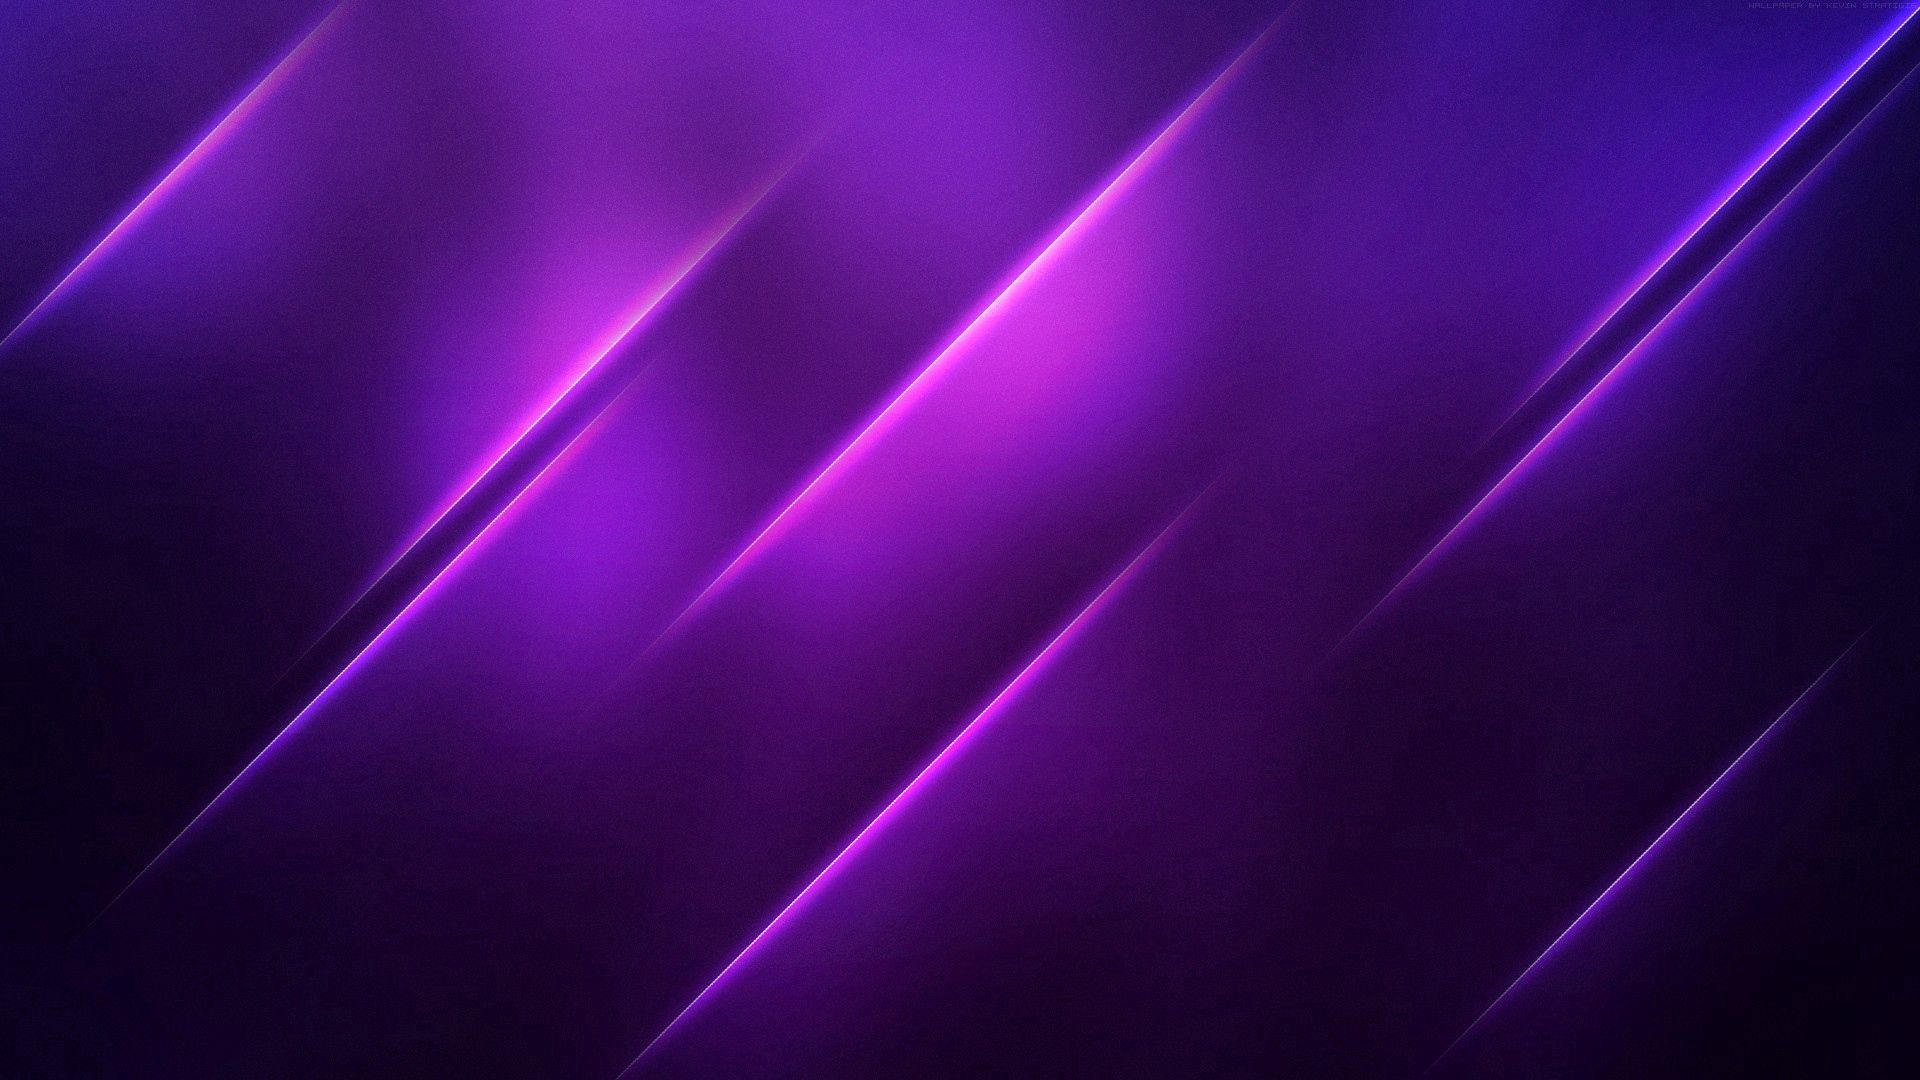 purple, violet, obliquely, abstract, bright, lines